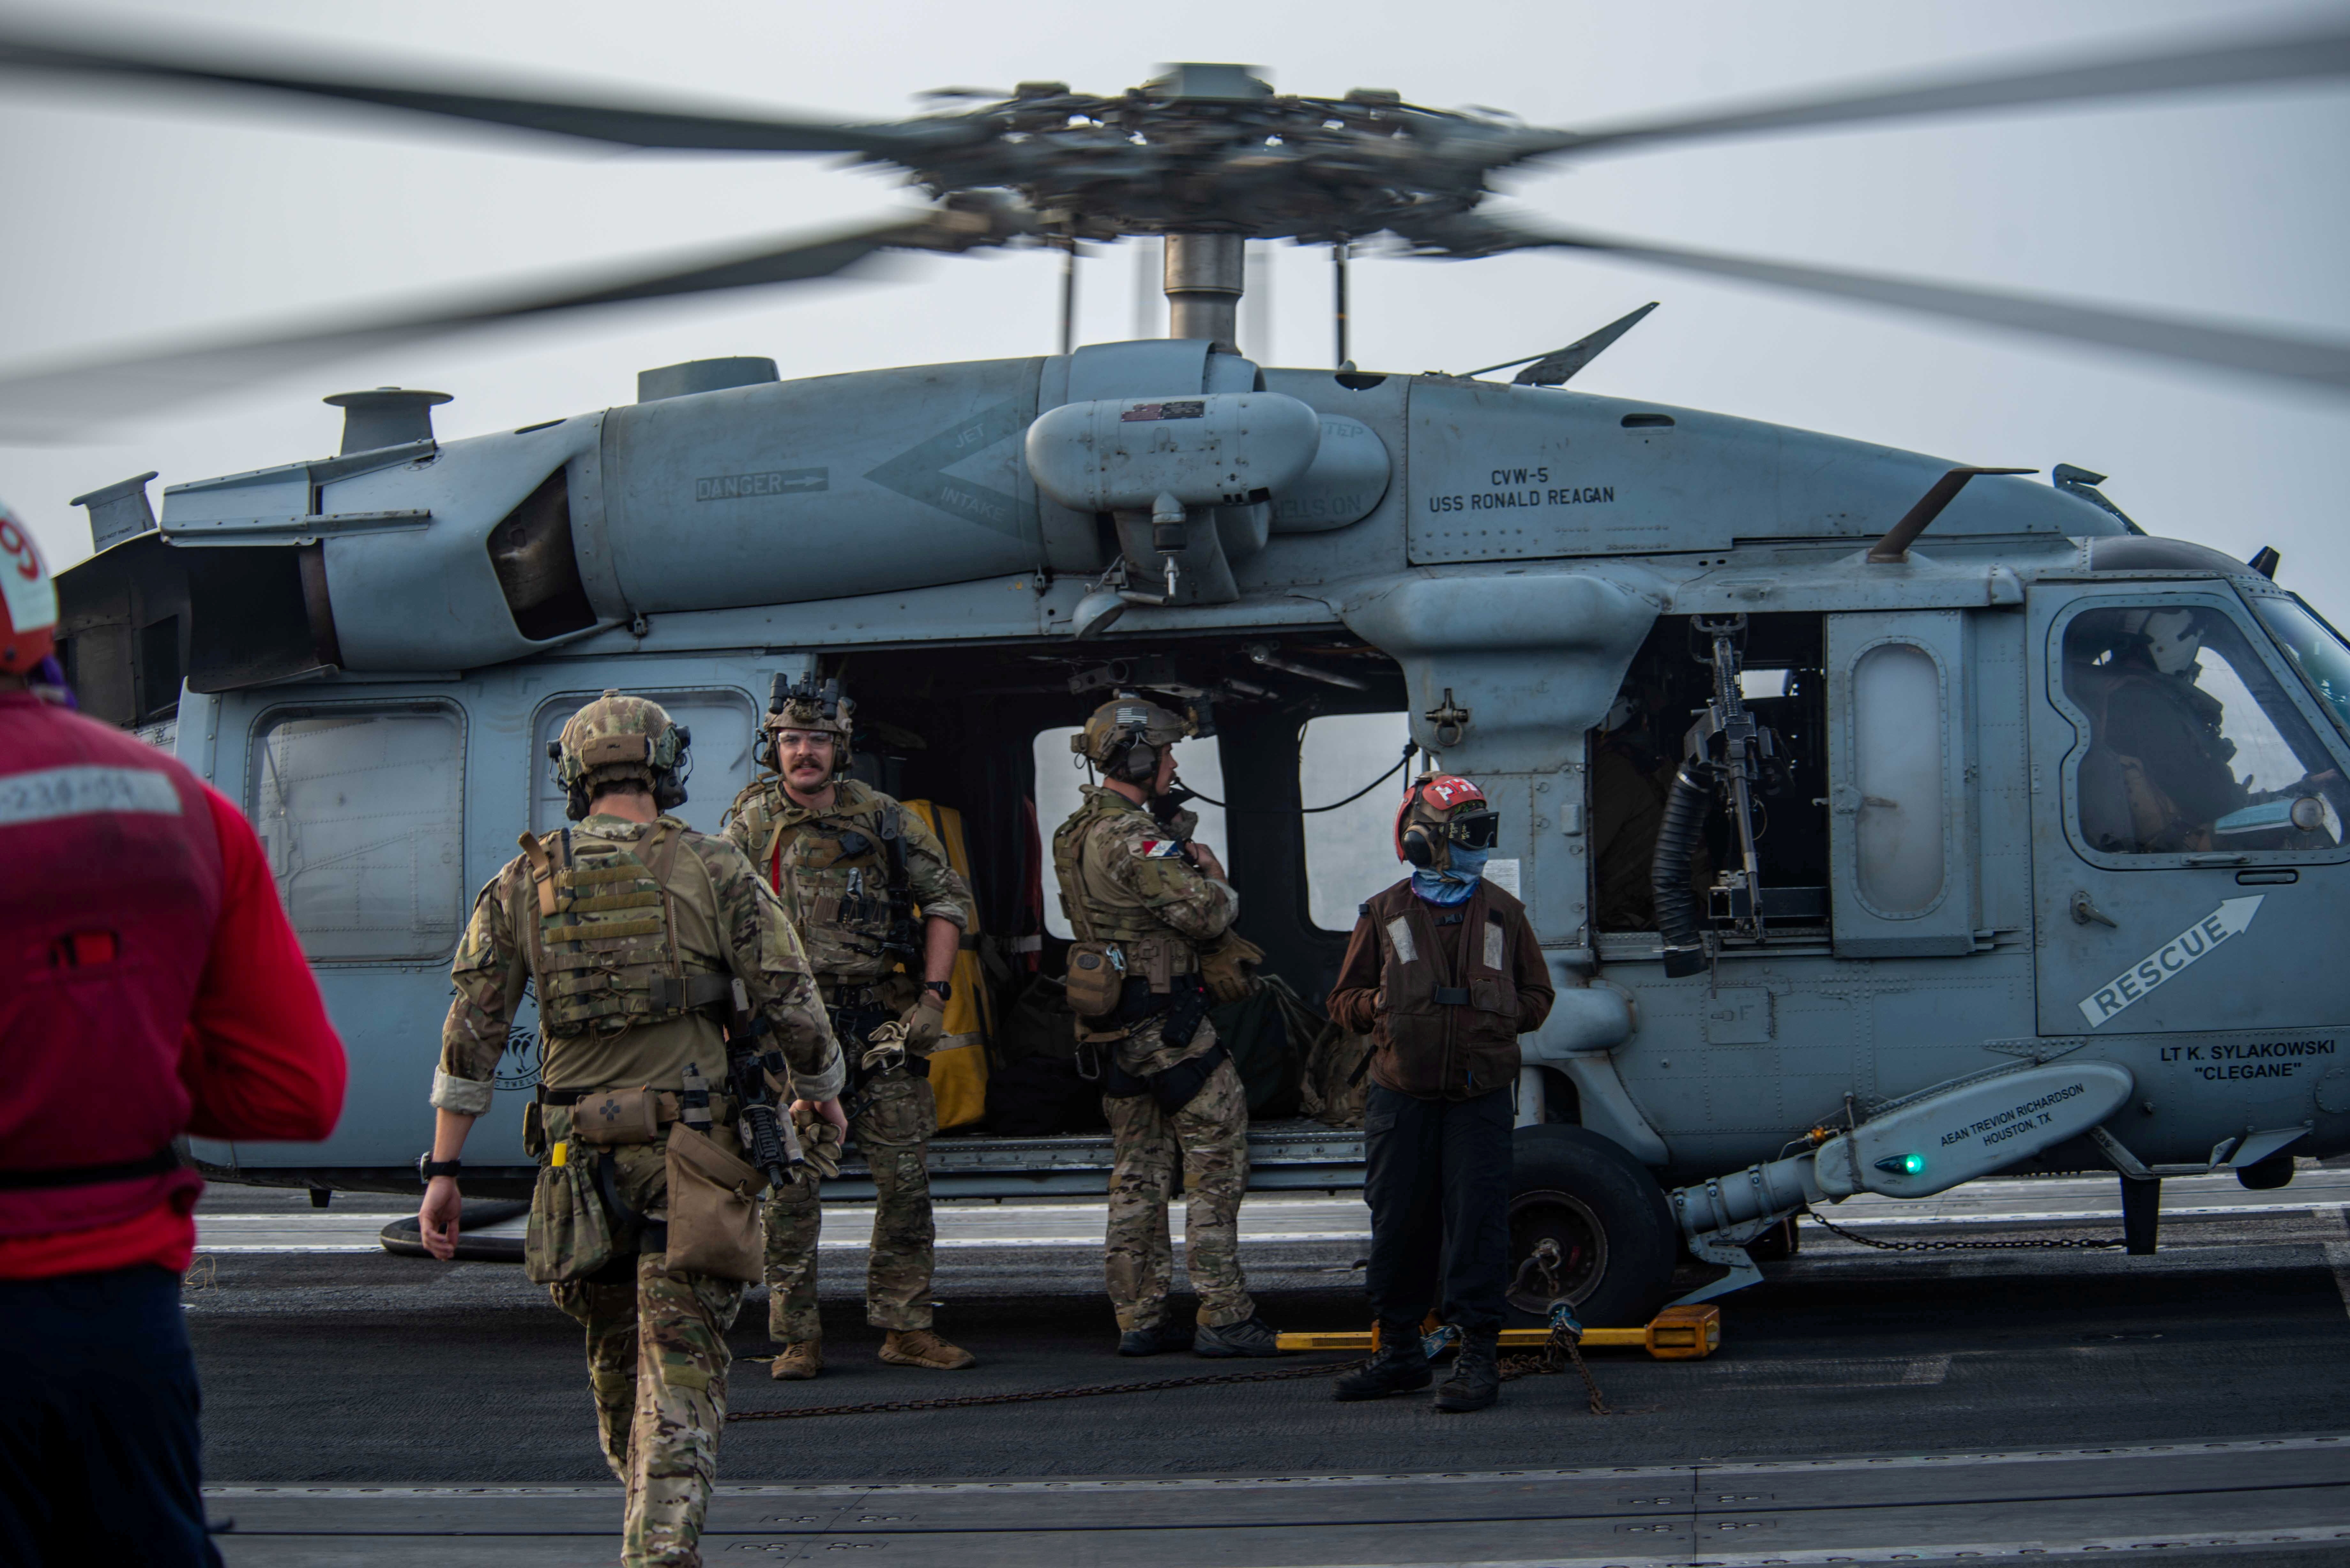 Sailors assigned to Explosive Ordnance Disposal Mobile Unit (EODMU) 5 board an MH-60S Sea Hawk helicopter, attached to the "Golden Falcons" of Helicopter Sea Combat Squadron (HSC) 12, are seen on the flight deck of aircraft carrier USS Ronald Reagan (CVN 76), in response to a call for assistance from the Mercer Street, a Japanese-owned Liberian-flagged tanker managed by Israeli-owned Zodiac Maritime, in the Arabian Sea July 30, 2021. Picture taken July 30, 2021. U.S. Navy/Handout via REUTERS 